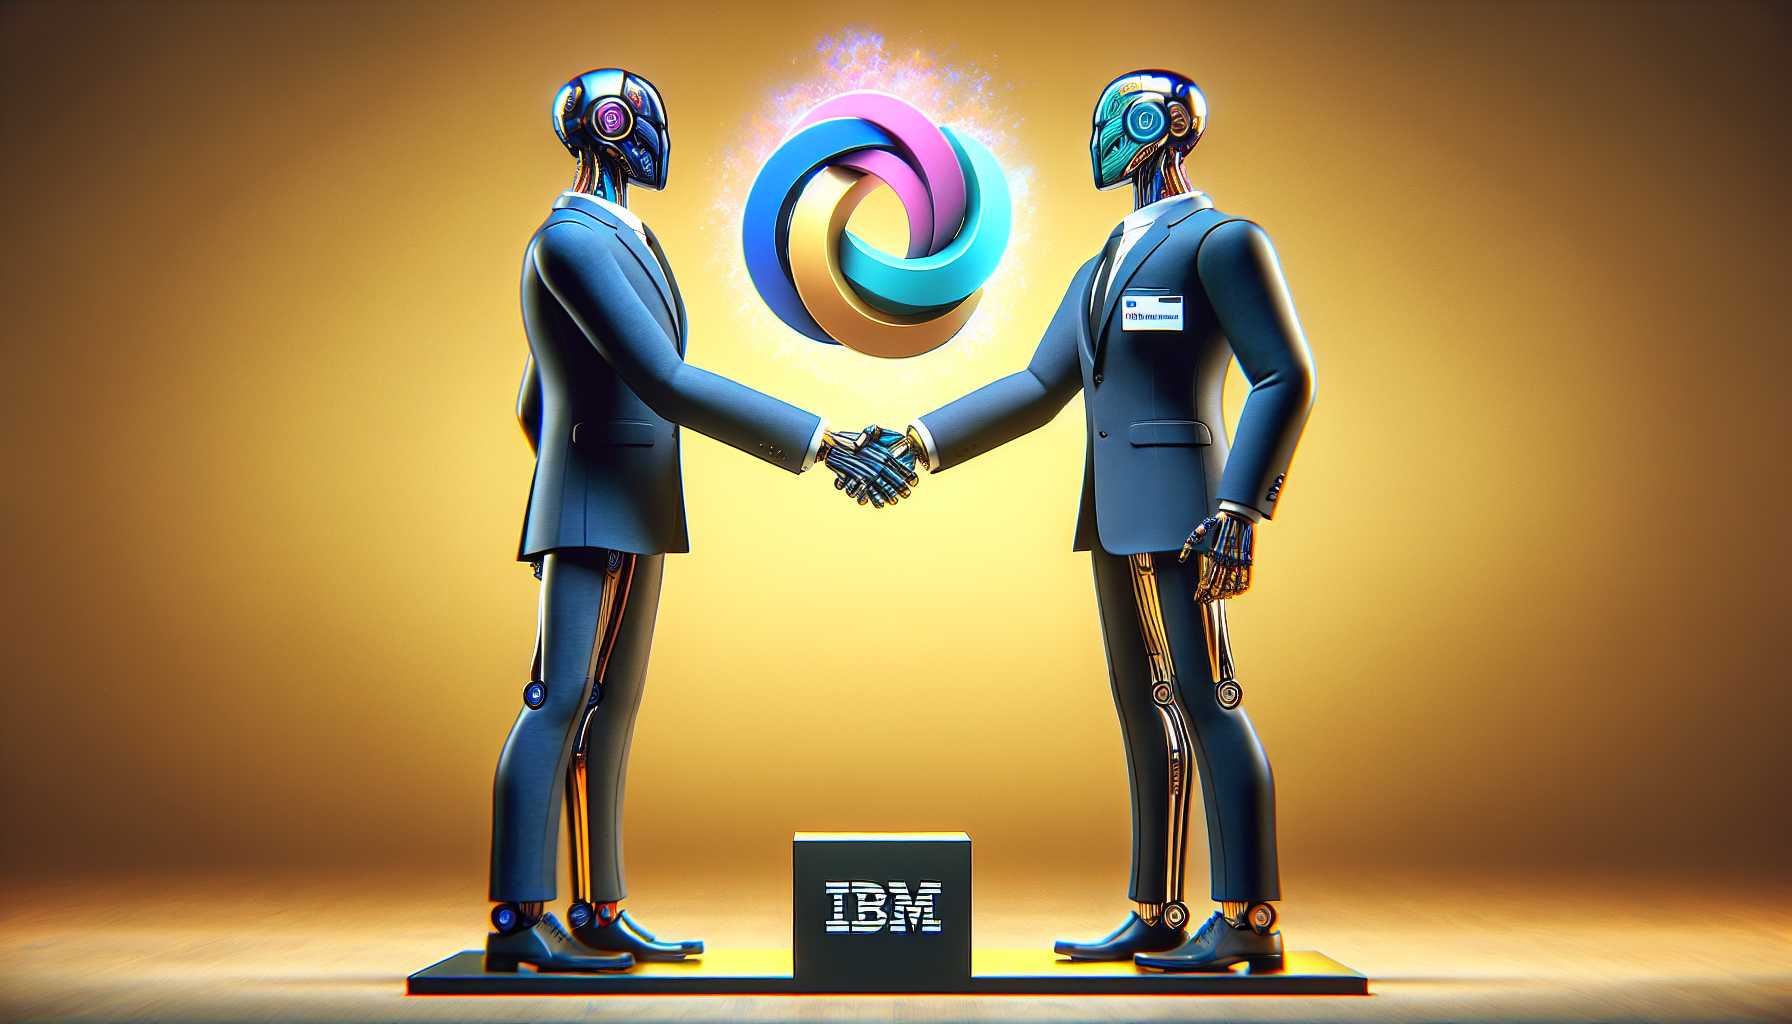 Corporate giants shaking hands over a deal - IBM and HashiCorp merger